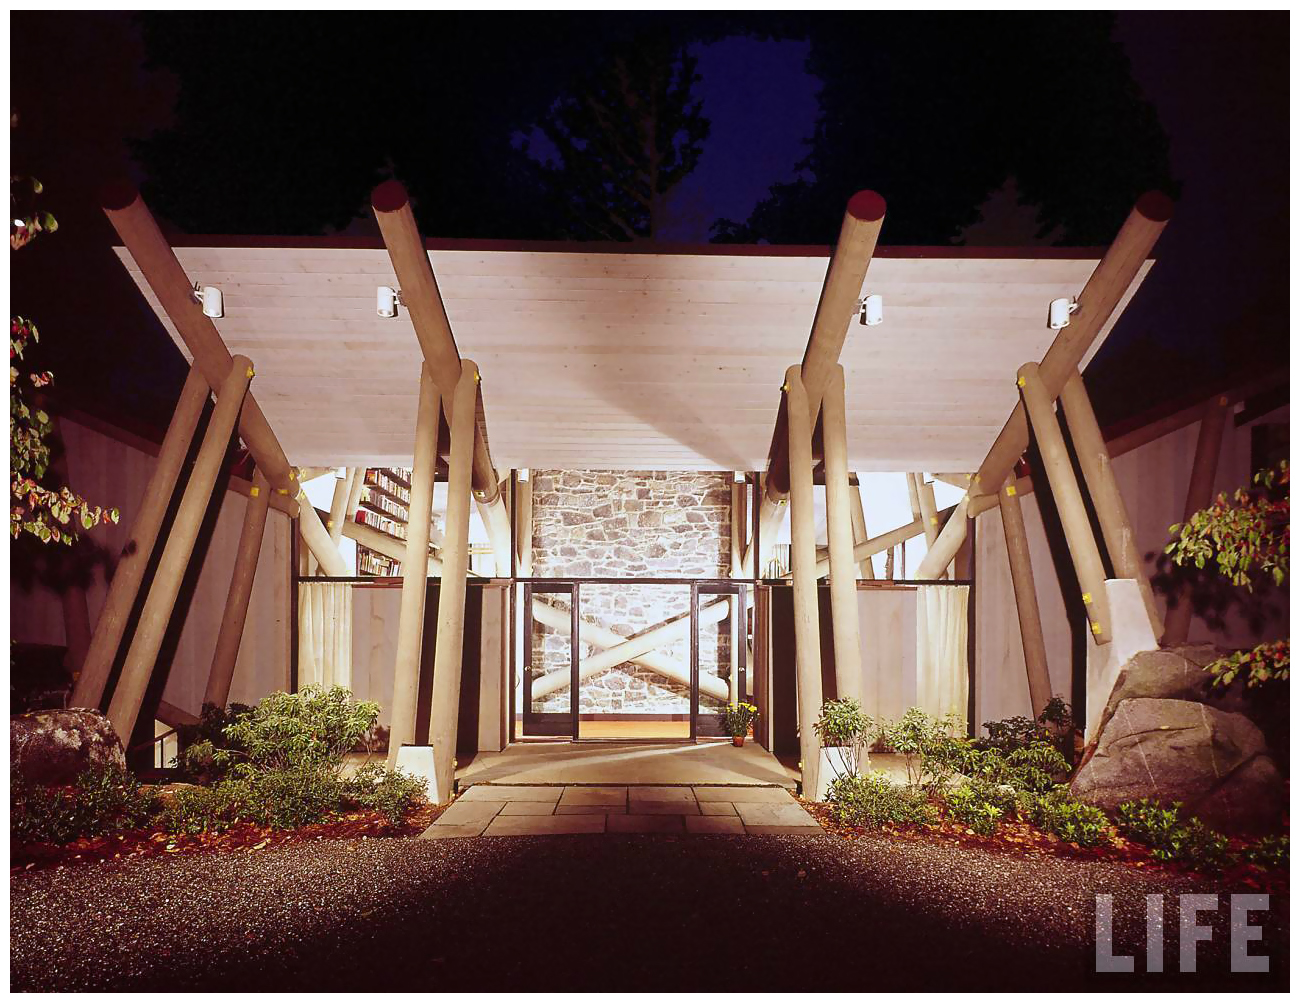  - photo-john-dominis-home-of-mr-and-mrs-chase-ritts-designed-by-john-johansen-here-is-the-main-entrance-whose-roof-is-supported-by-wooden-telephone-poles